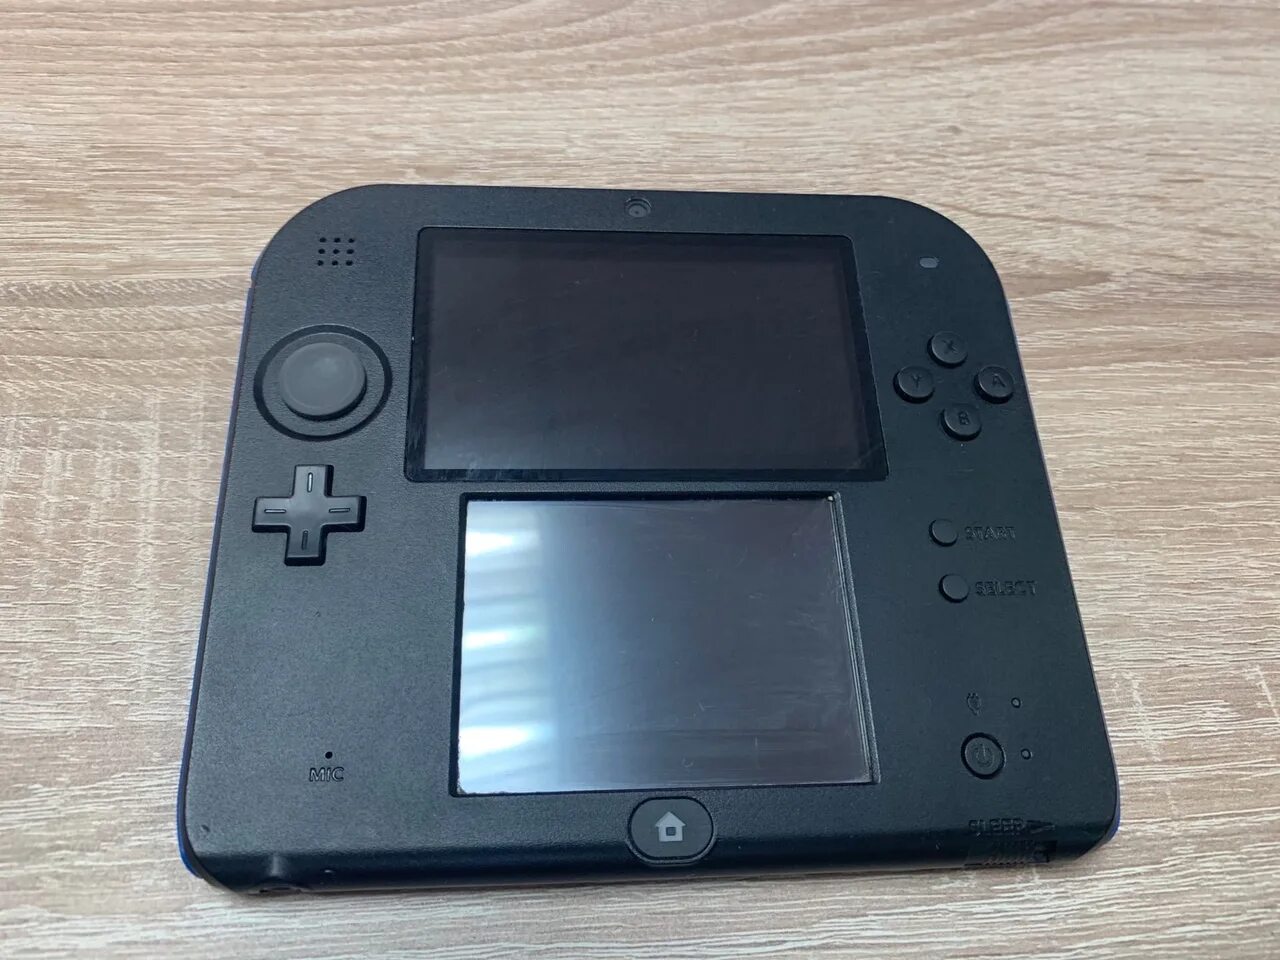 Nintendo 2ds. Nintendo 2ds XL. New Nintendo 2ds. Nintendo 2ds old.